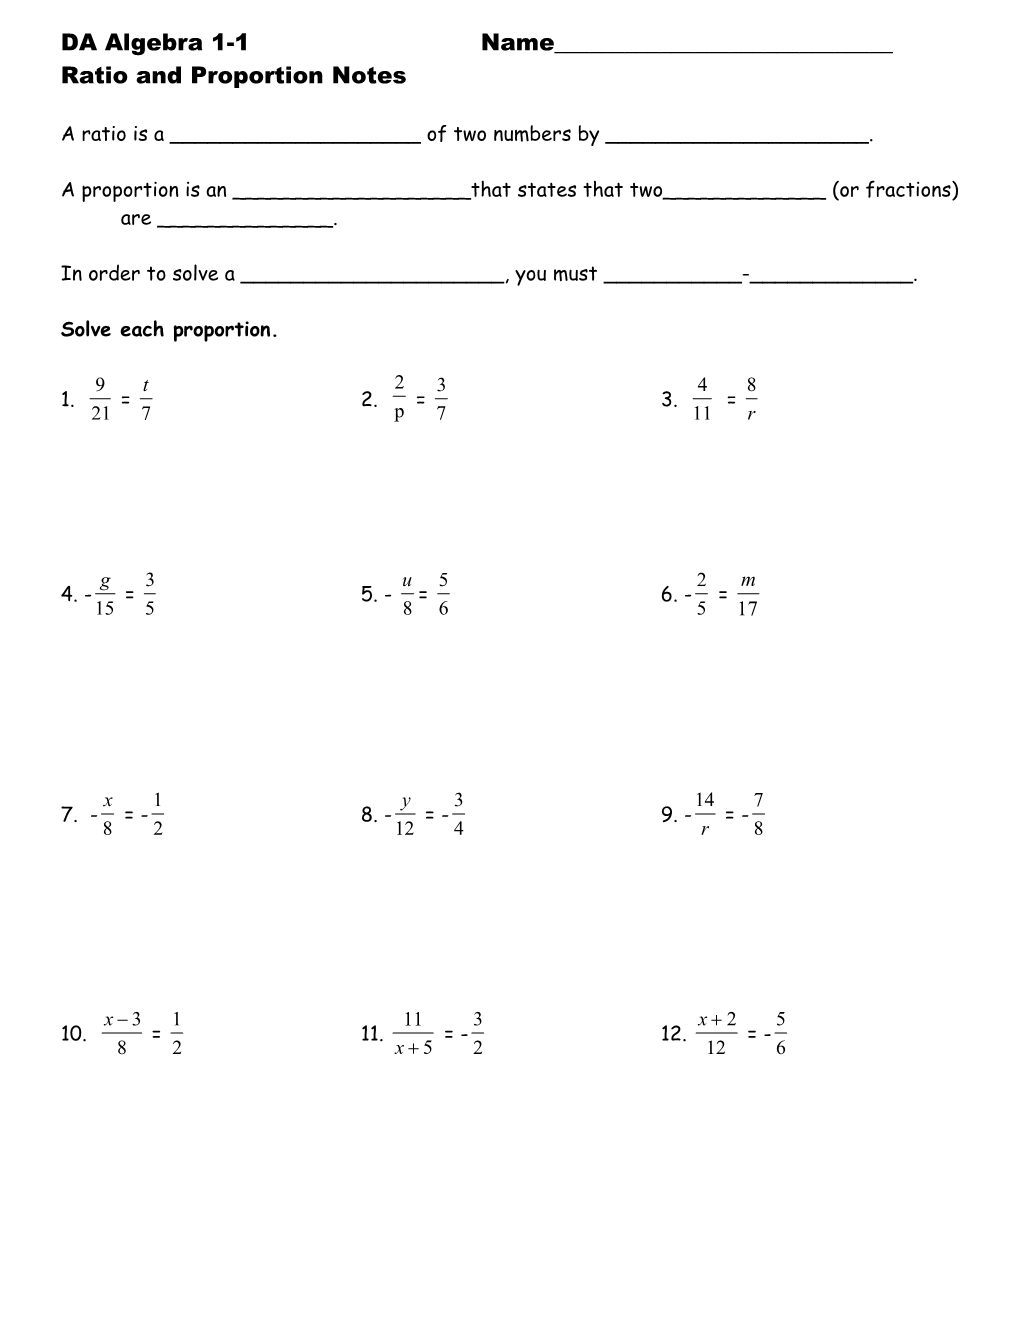 Ratio and Proportion Notes